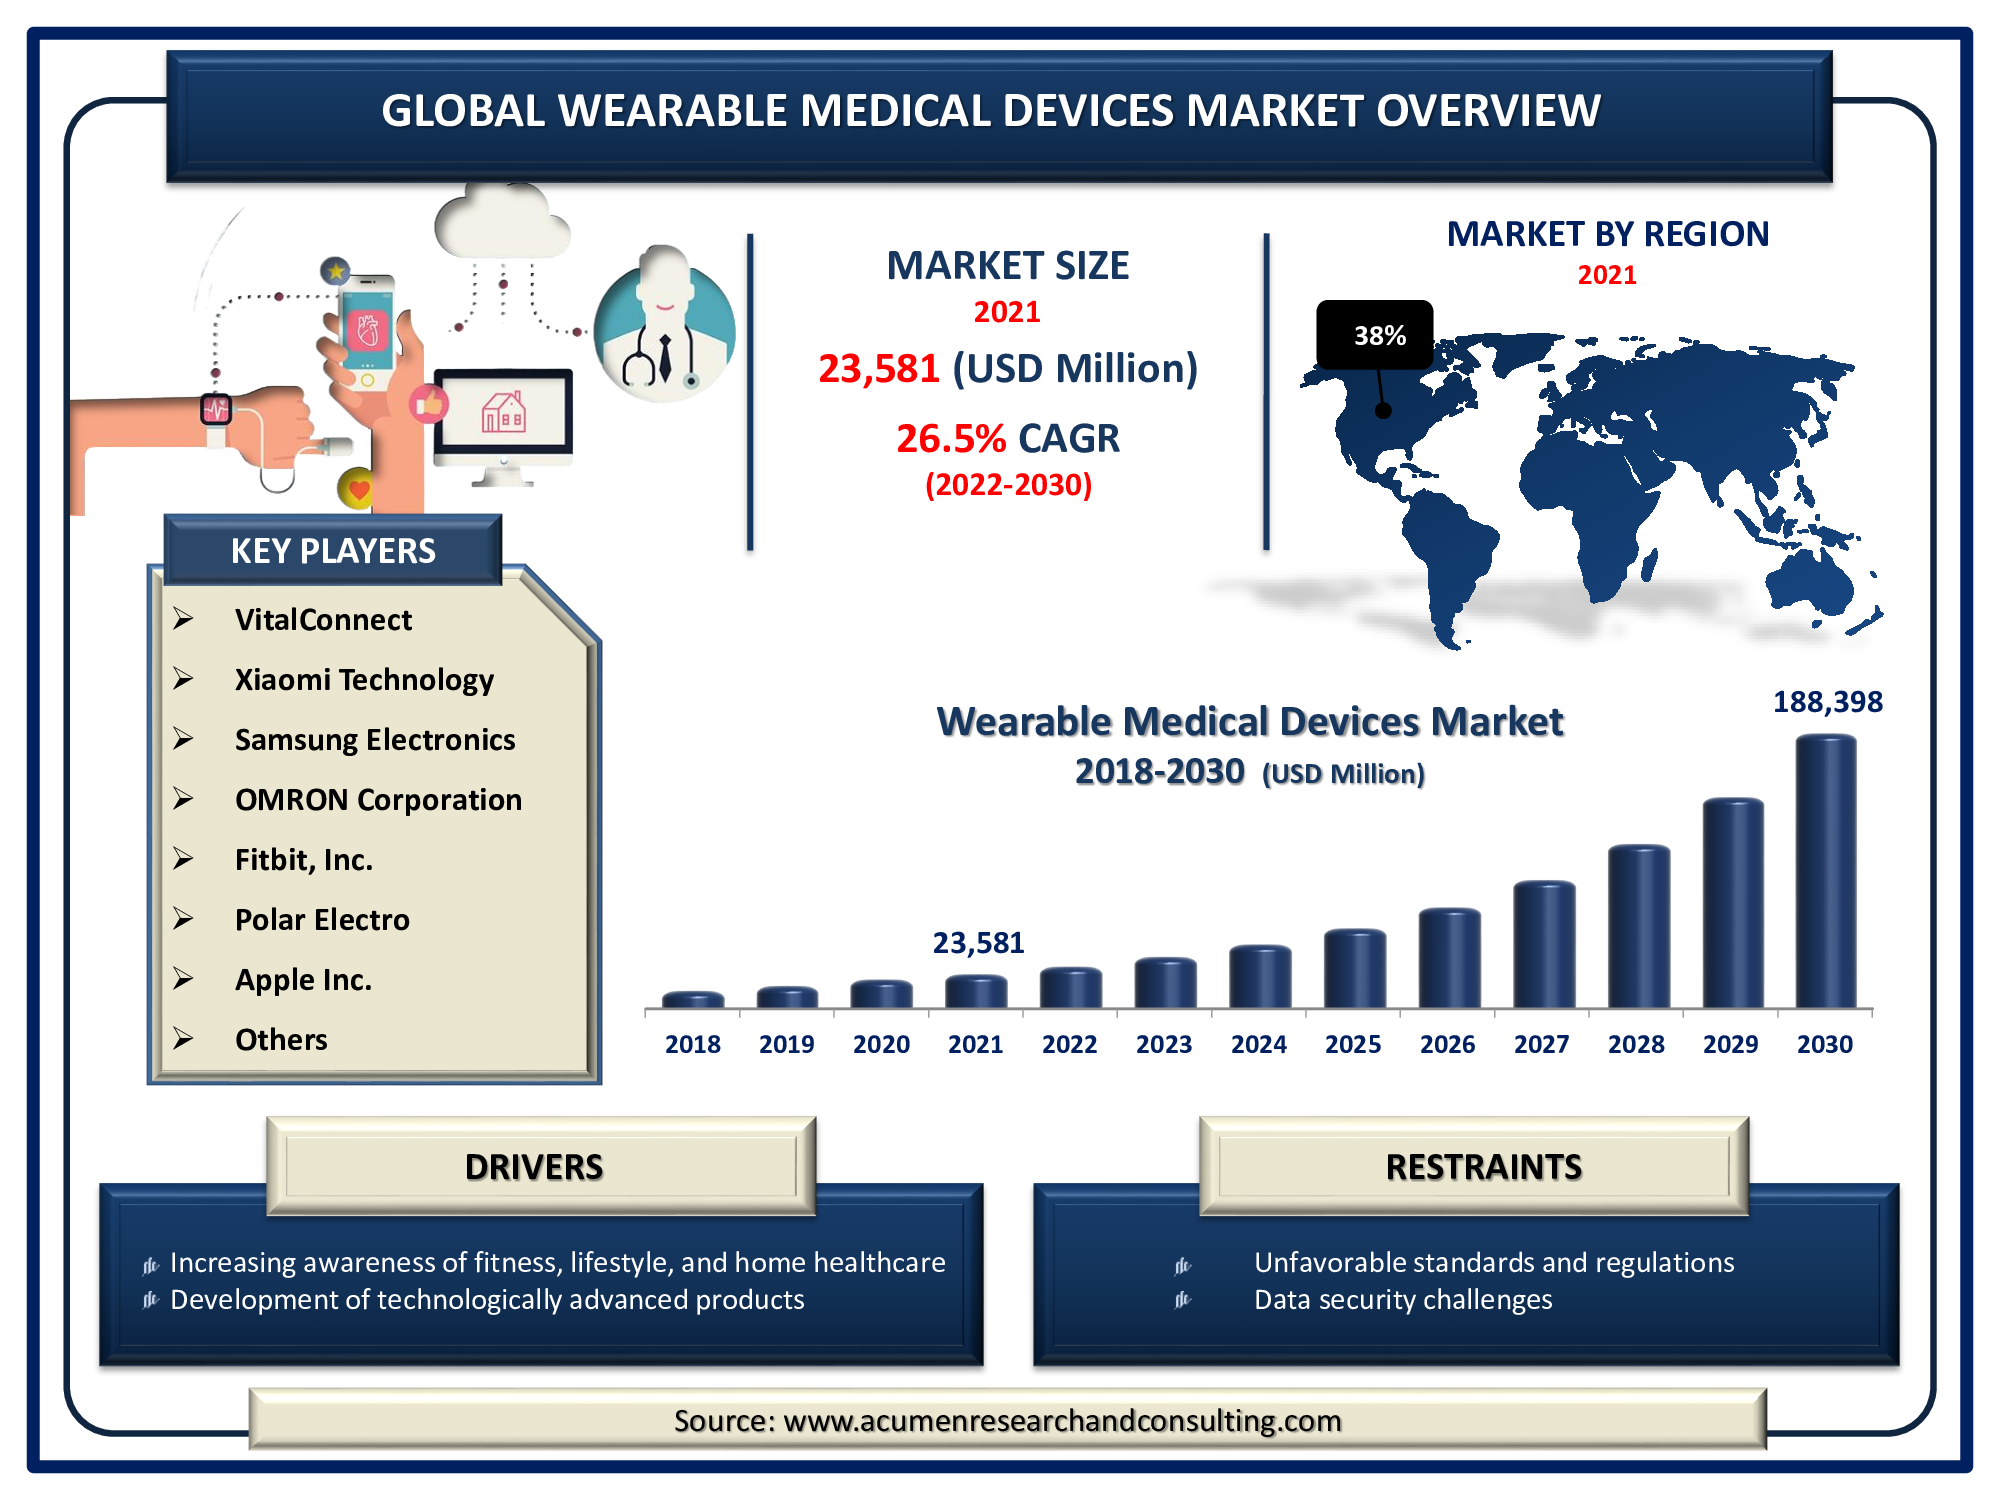 The Global Wearable Medical Devices Market Size Accounted for USD 23,581 Million in 2021 and is predicted to be worth USD 188,398 Million by 2030, with a CAGR of 26.5% during the forecasting period from 2022 to 2030.